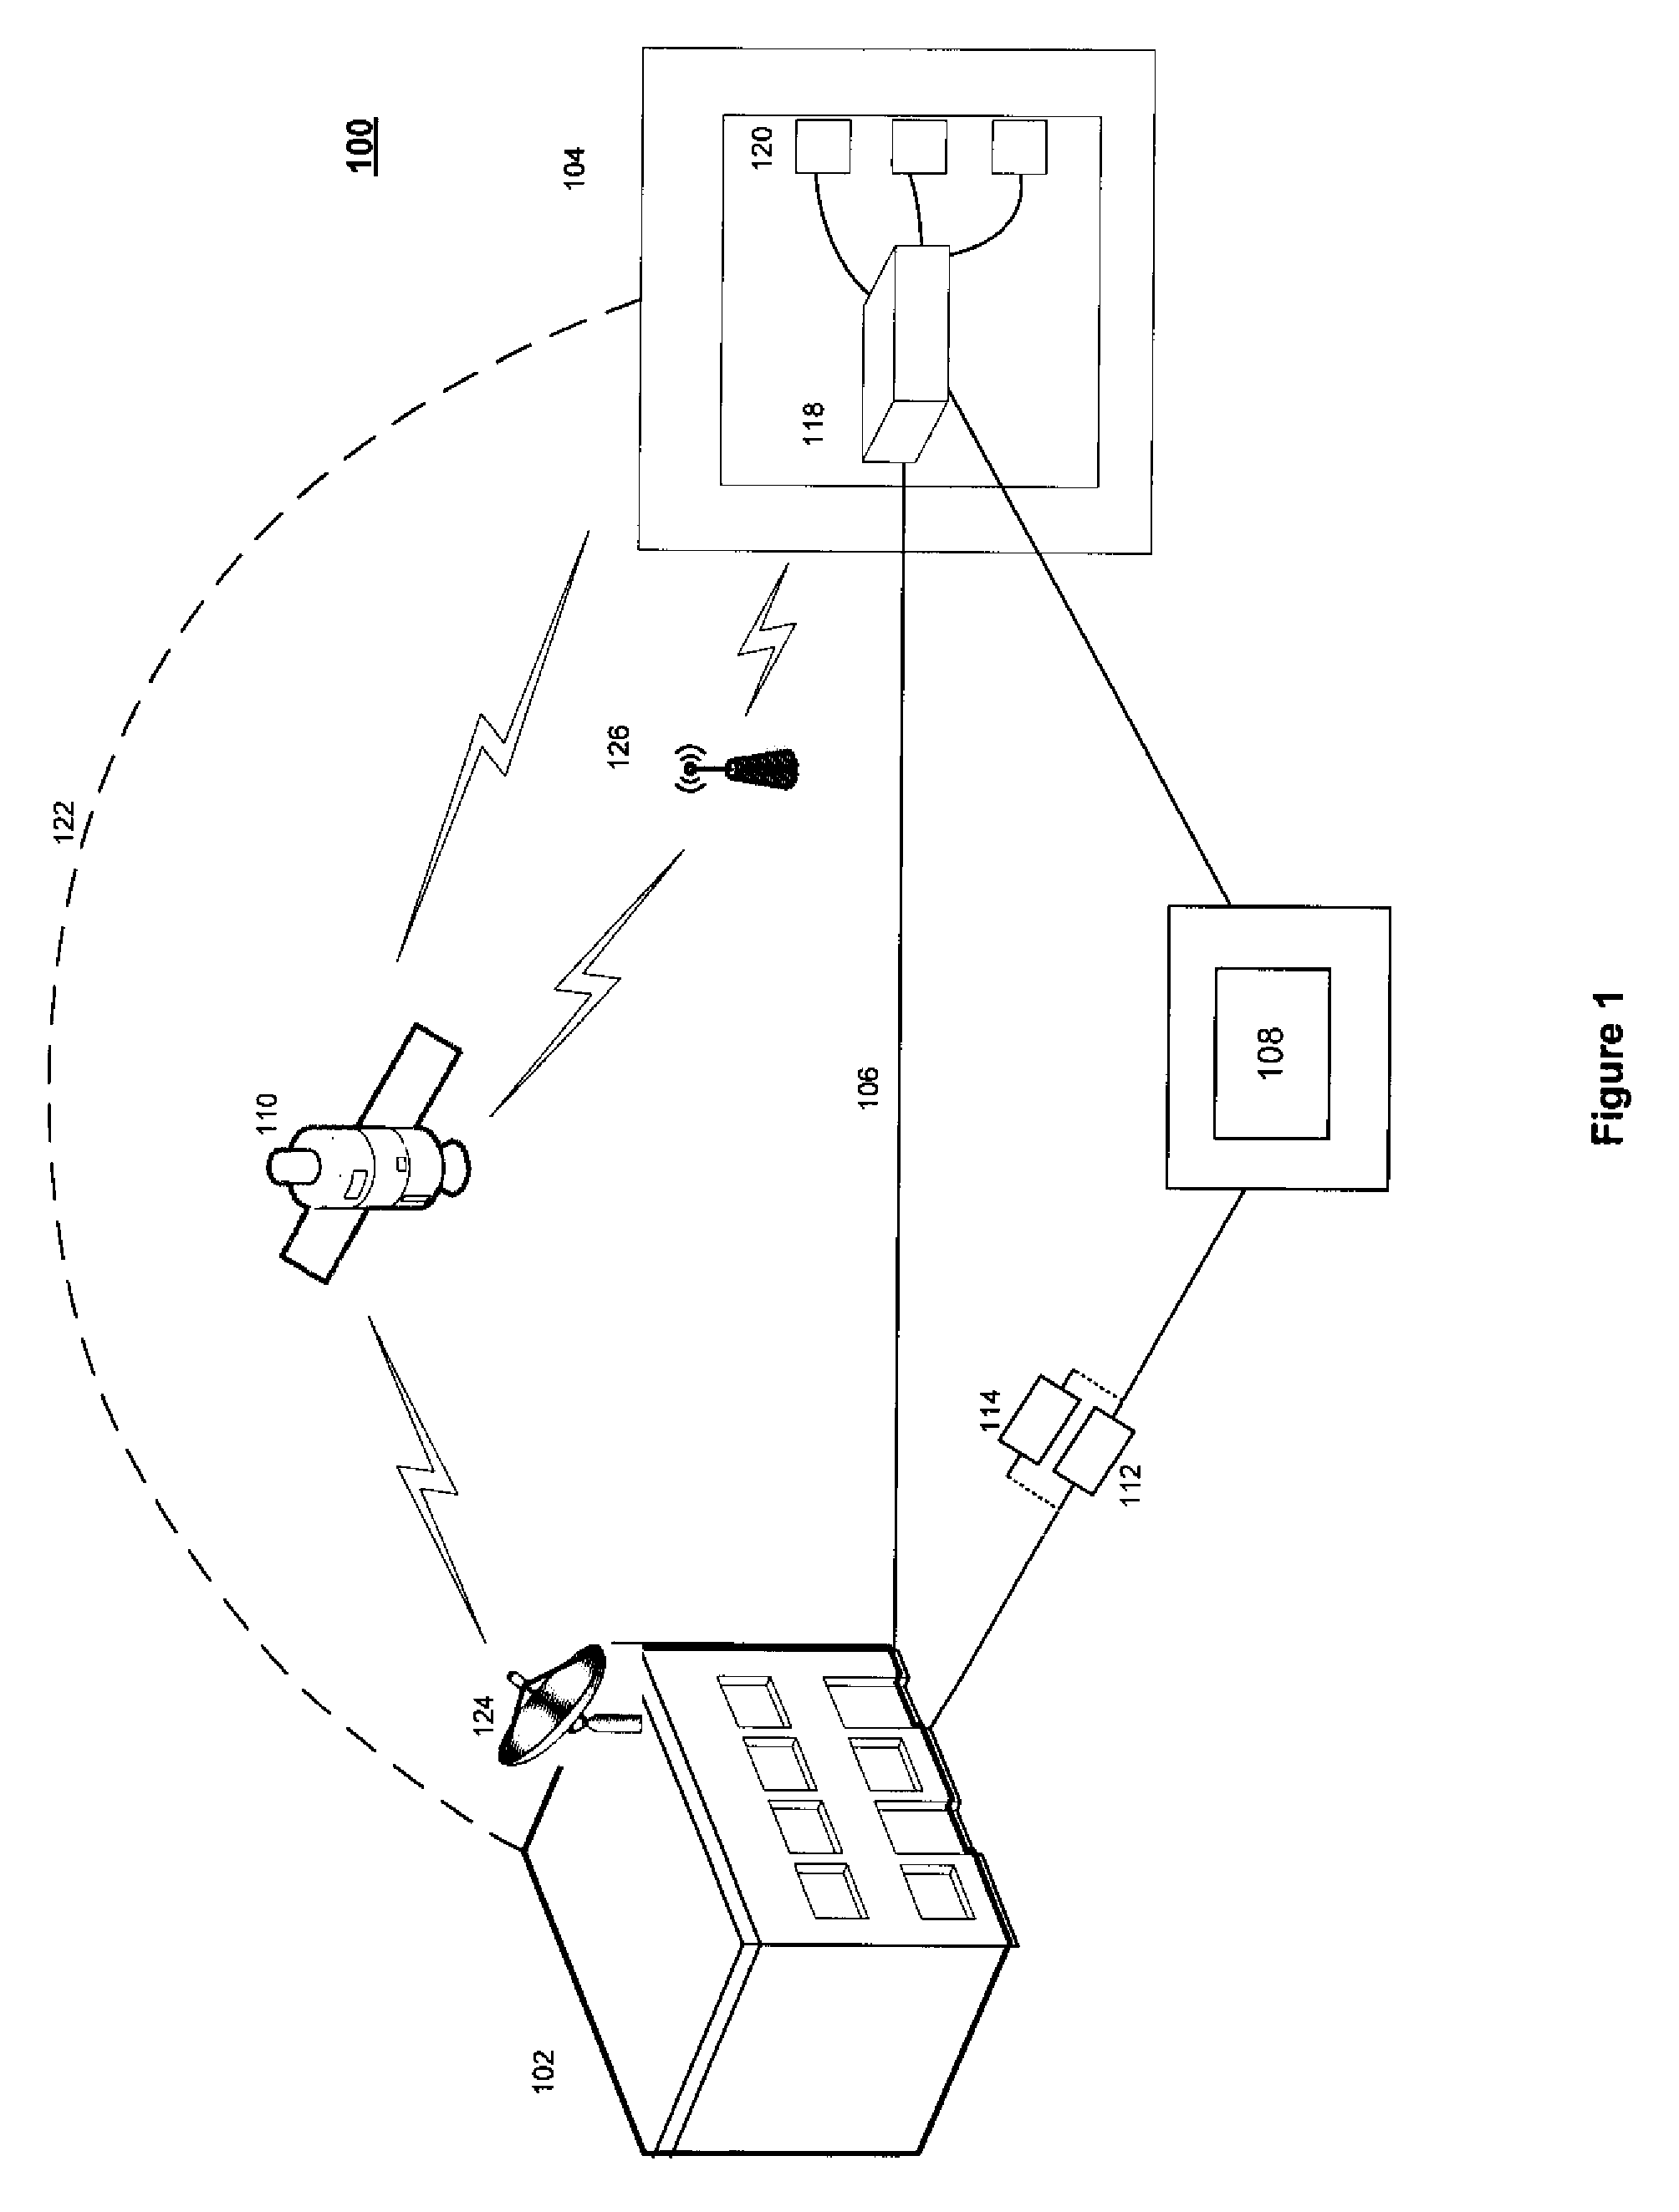 Multi-layered model for survivability analysis of network services